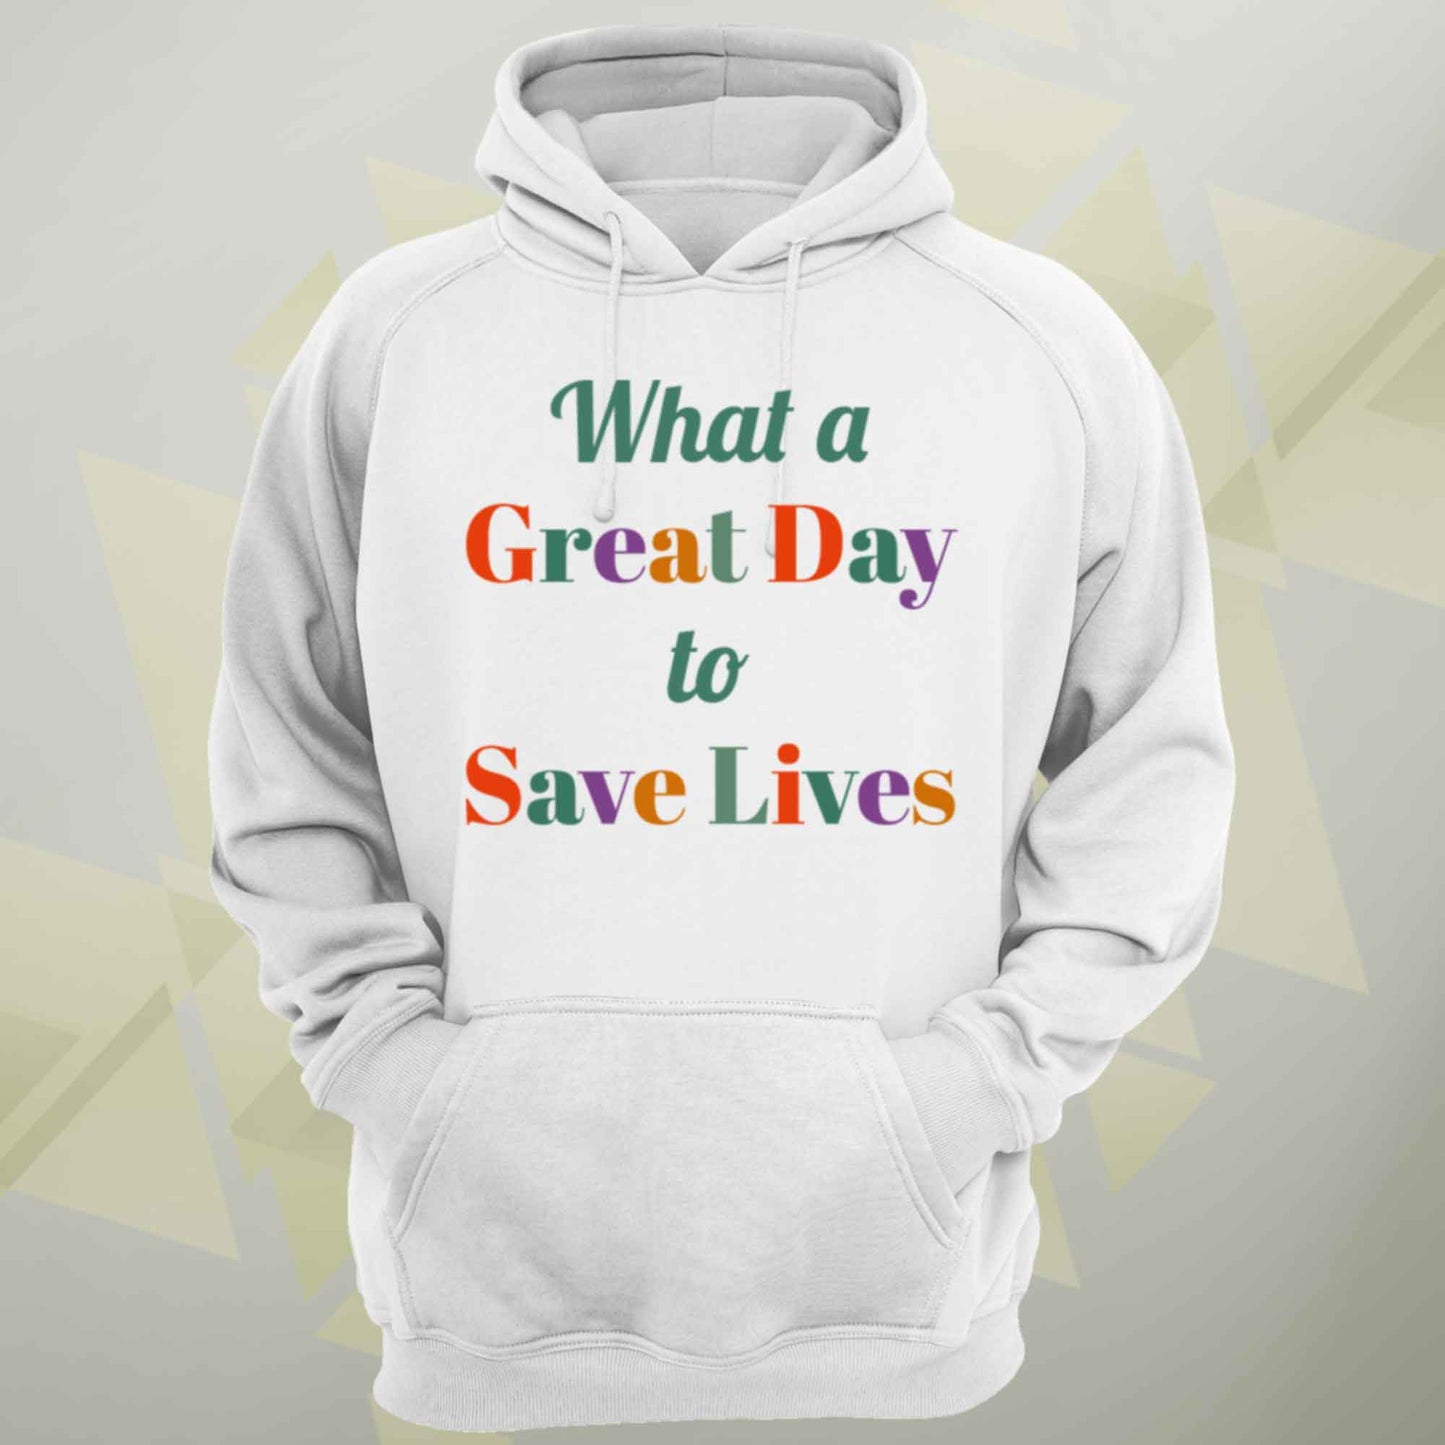 A Great Day To Save Lives Unisex Hoodie